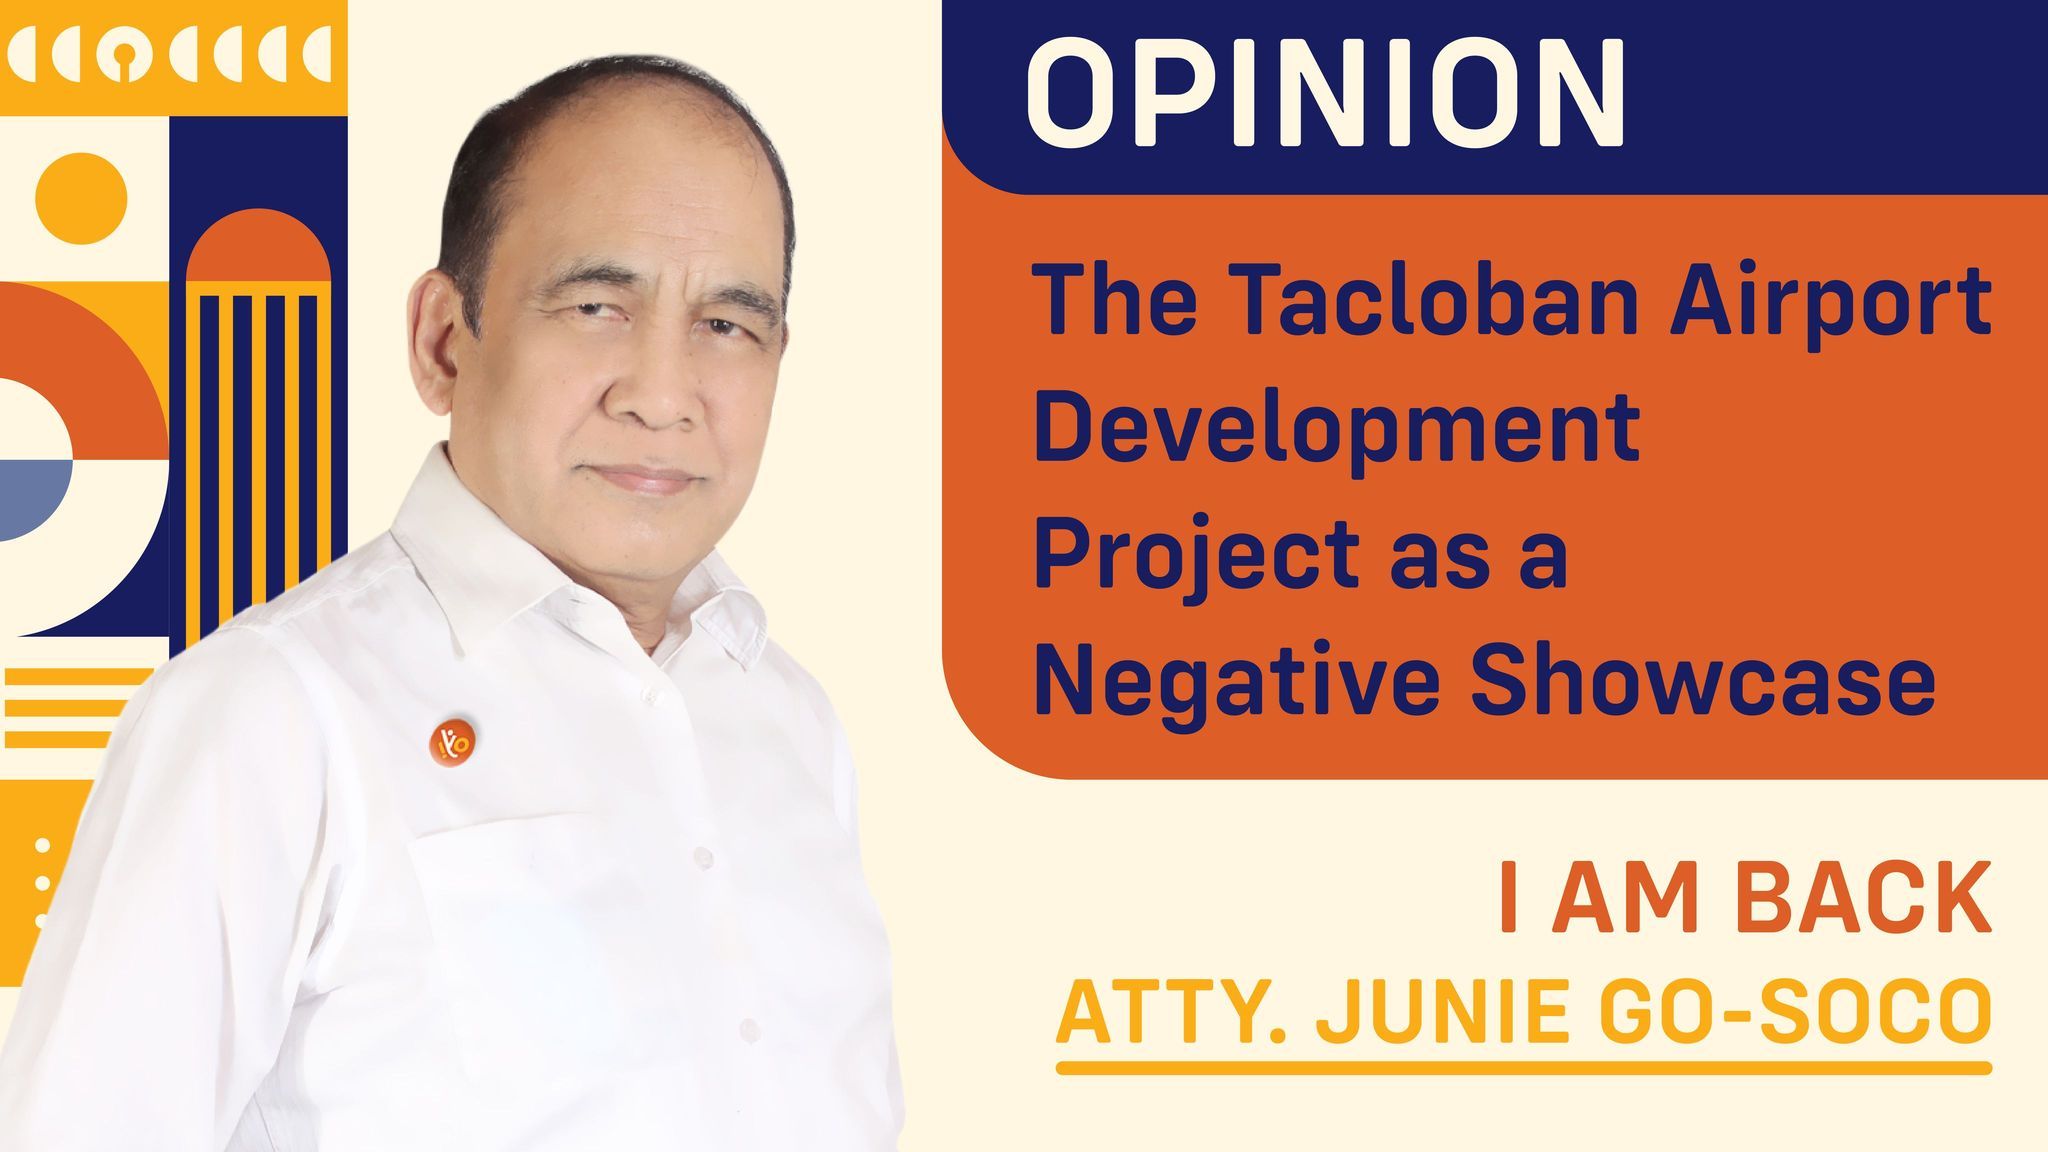   The Tacloban Airport Development Project as a Negative Showcase